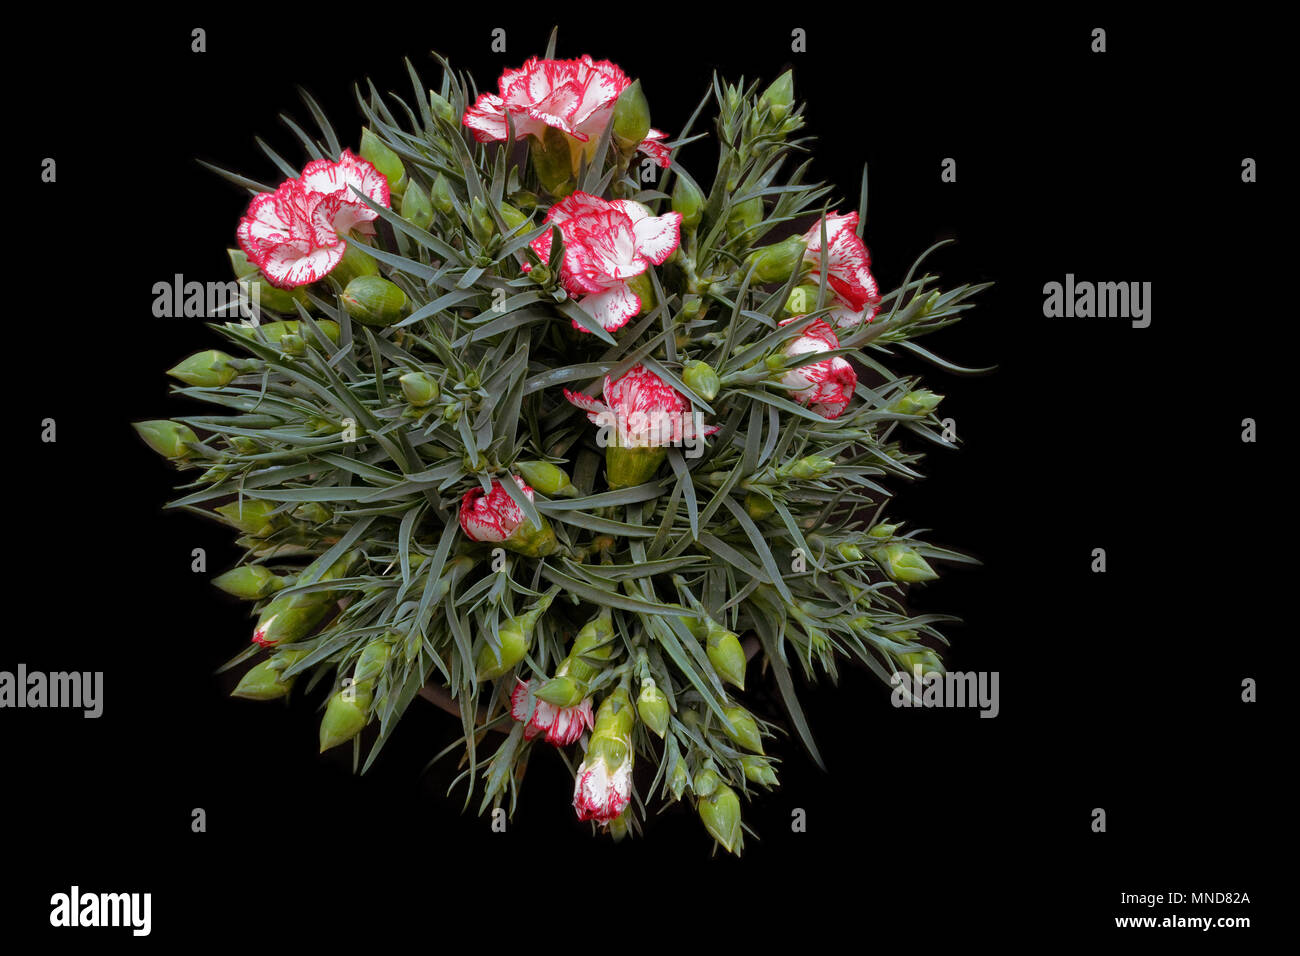 Red Dianthus caryophyllus bouquet in black background Stock Photo